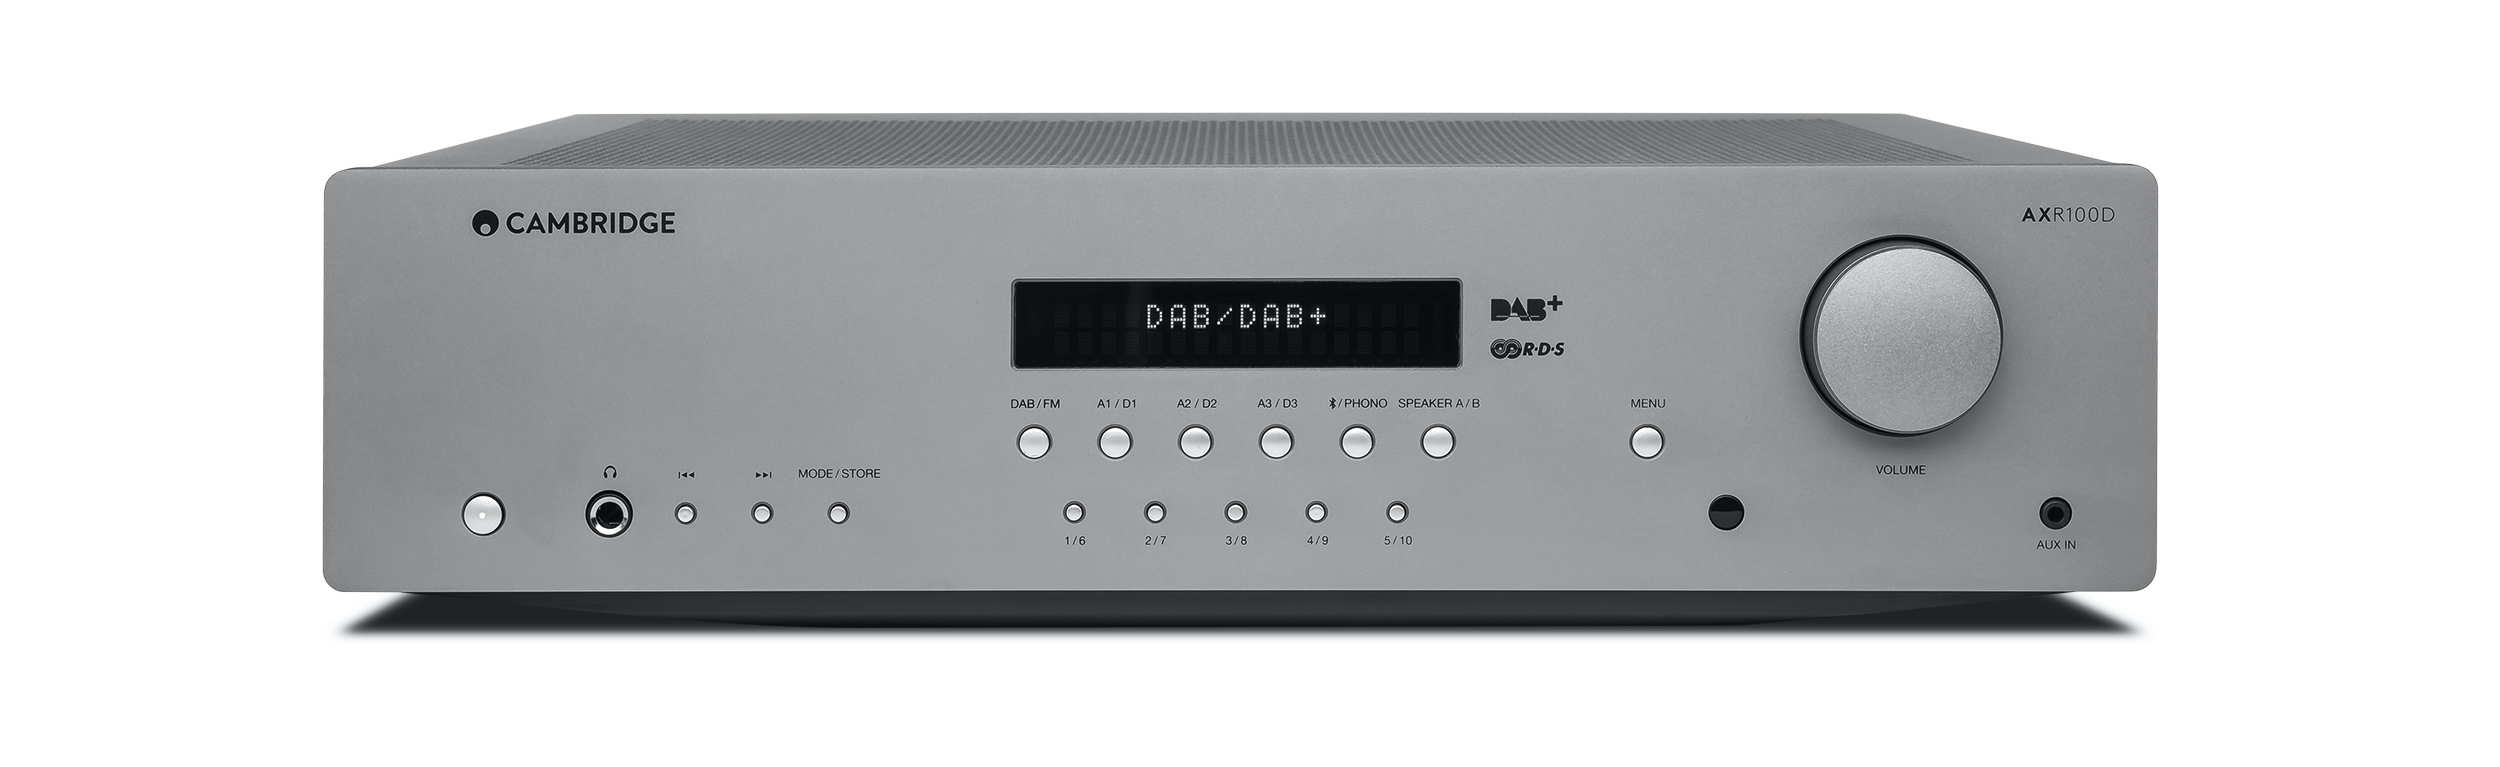 review:-cambridge-audio-axr100d-receiver-affordable-solution-with-extensive-options